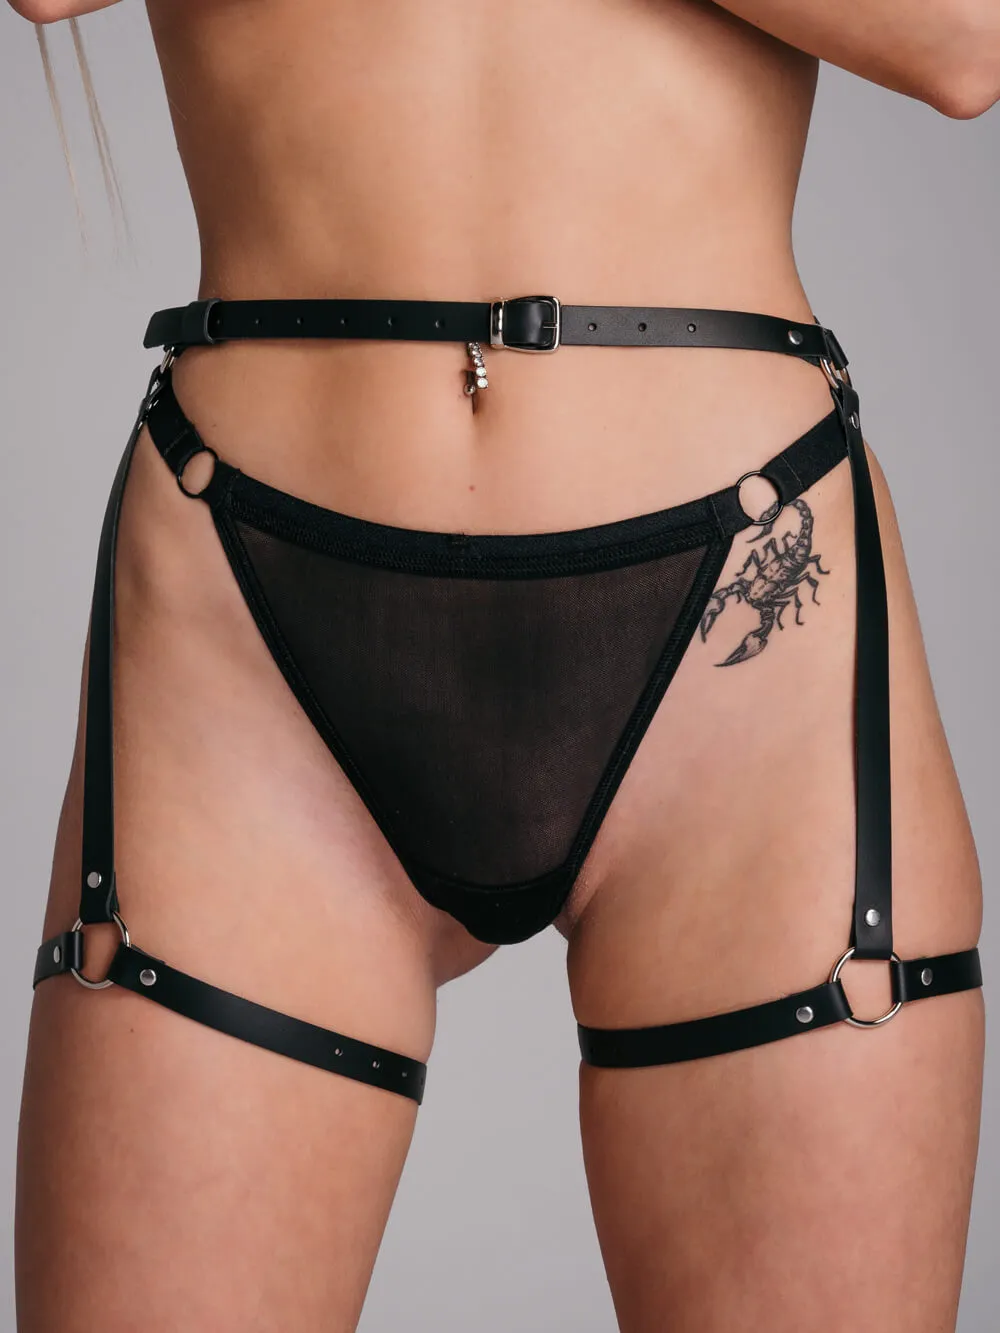 Erotic leather lingerie for women - leather panties with fringes and Texas leather garters.